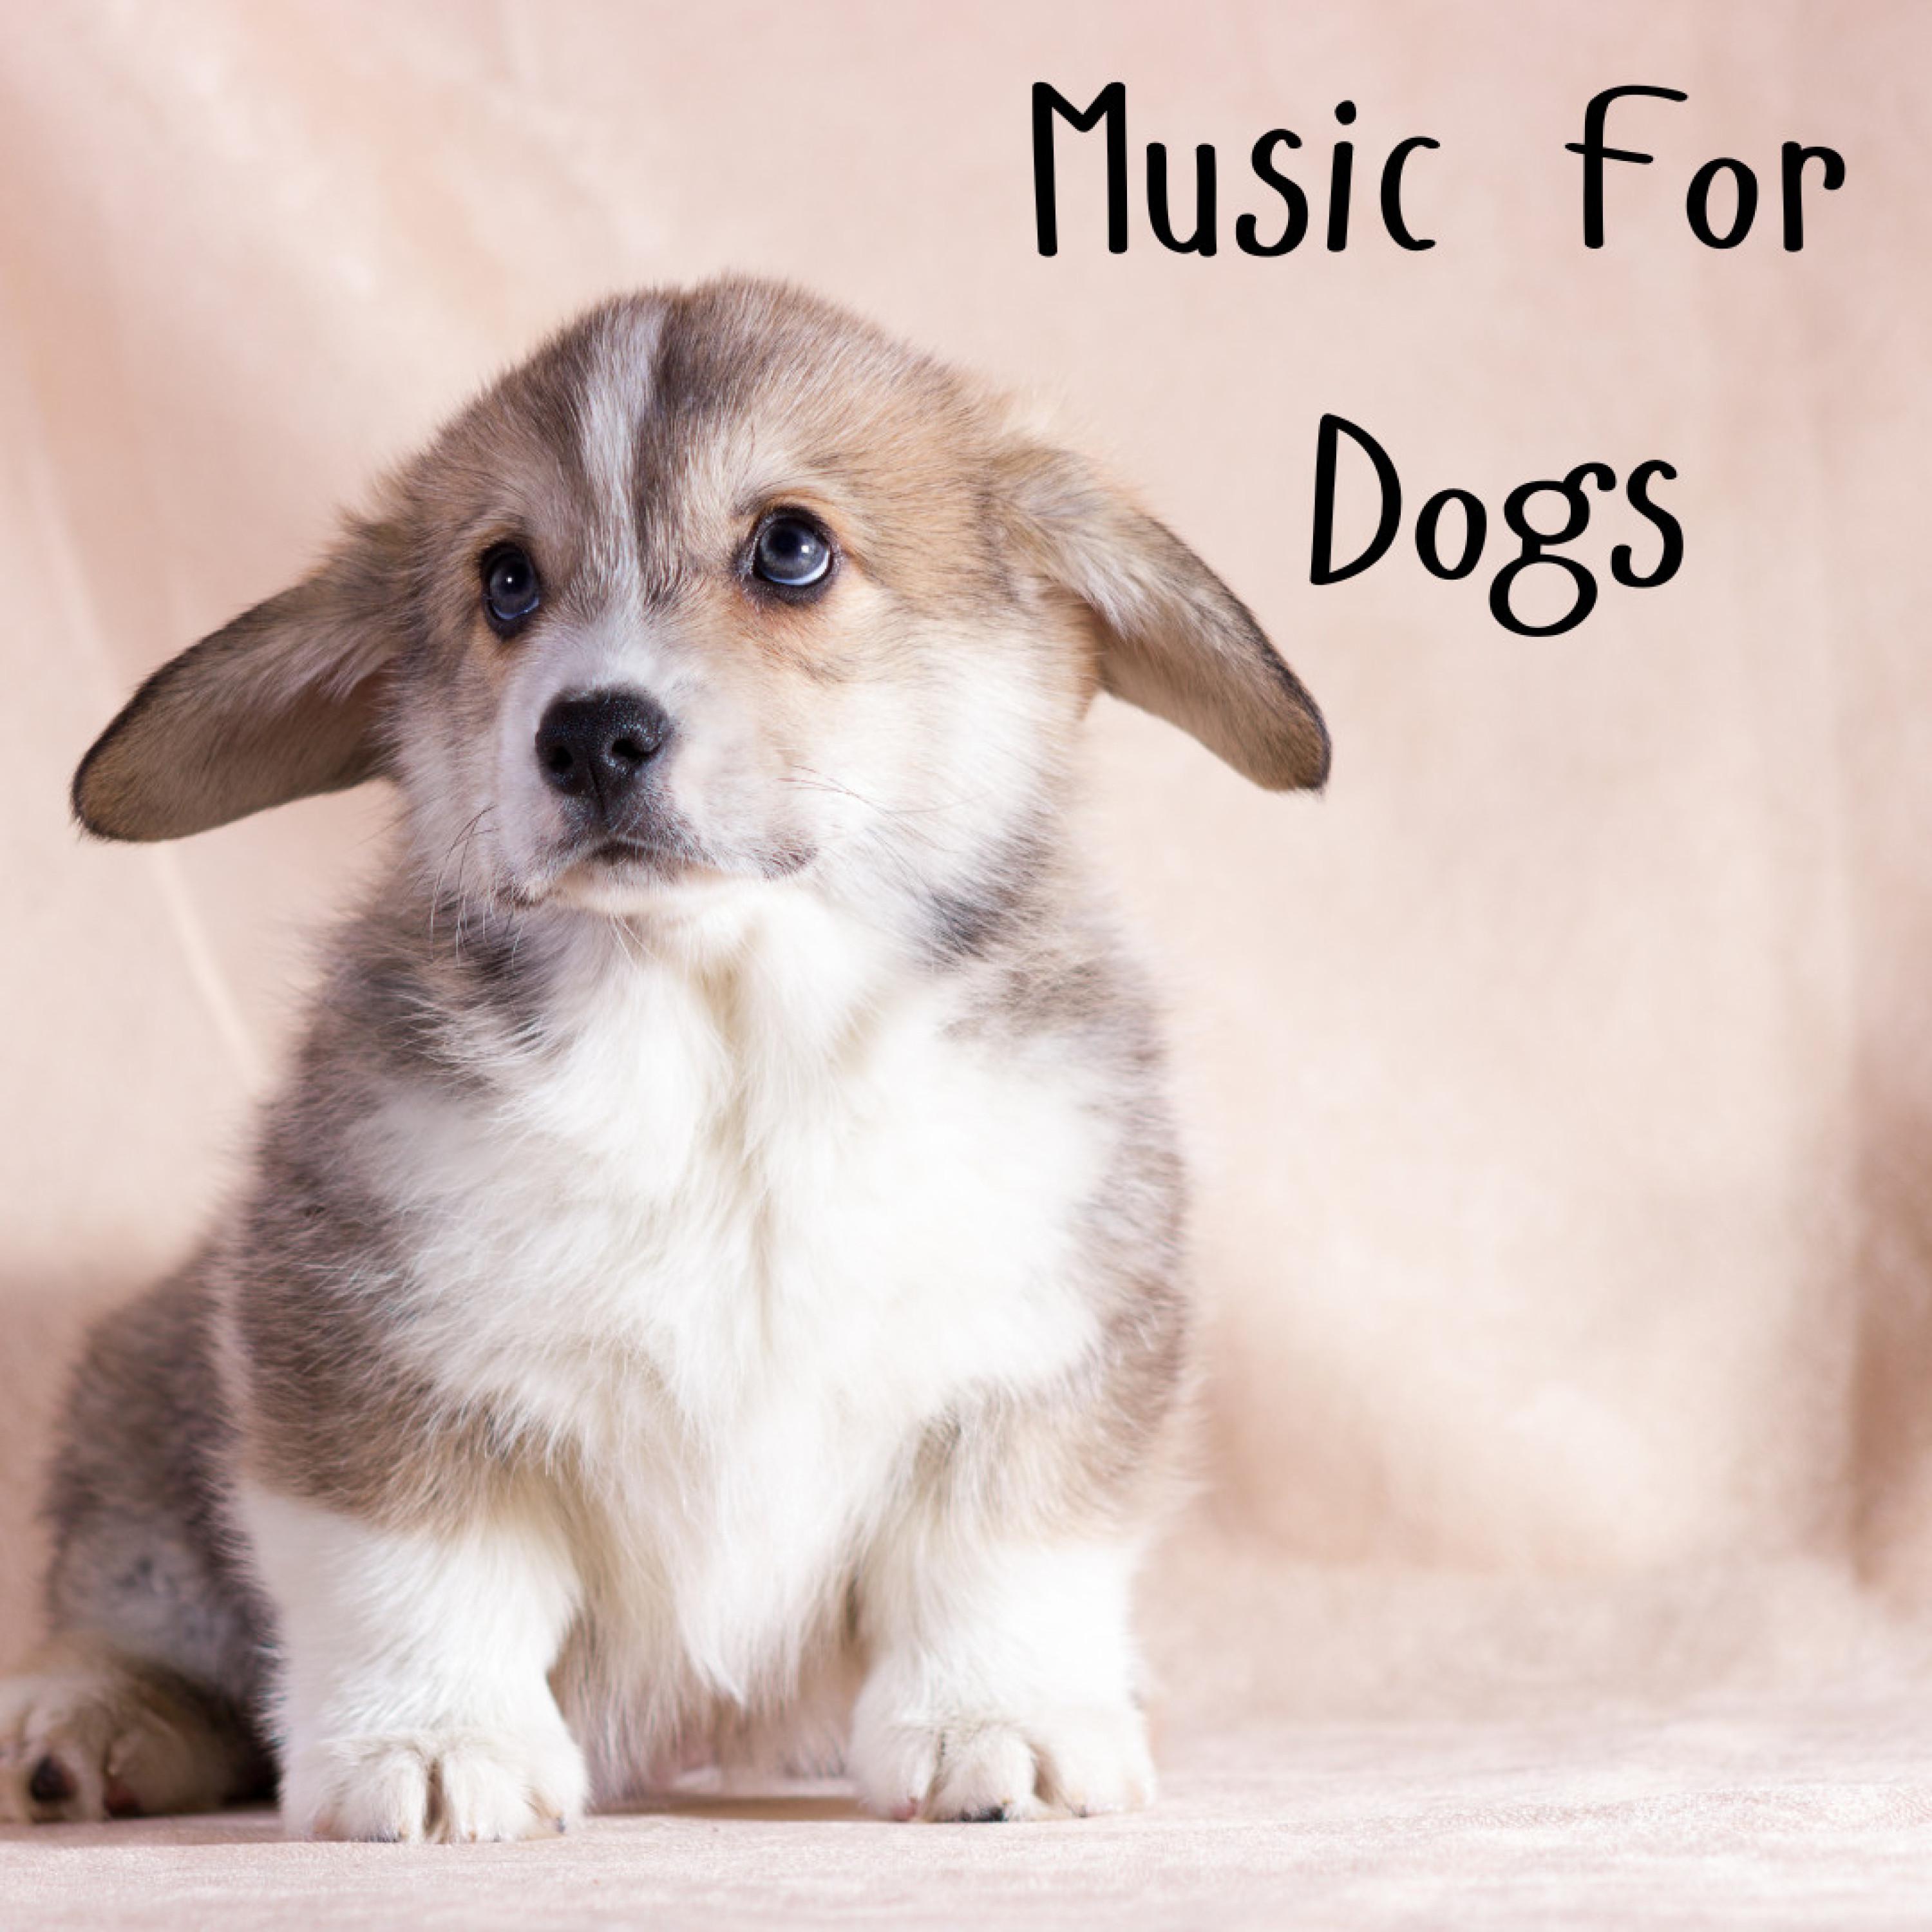 Music For Dogs - Dreamy Dog Days